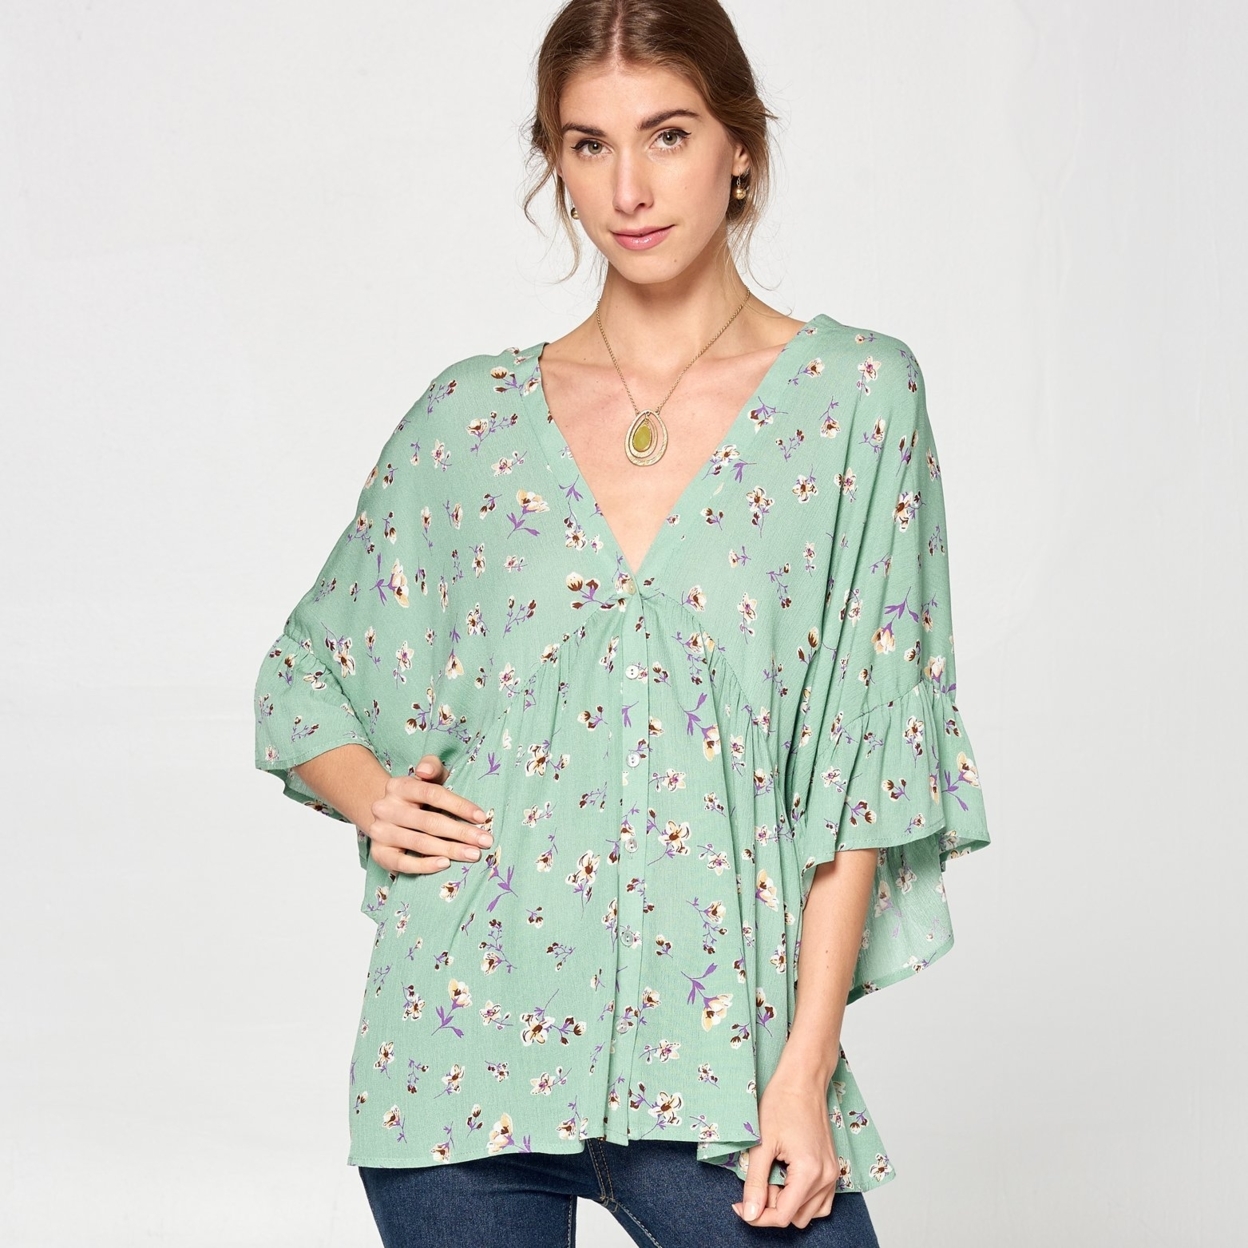 Calico Floral Woven Top - Dusty Sage, Small (2-6)